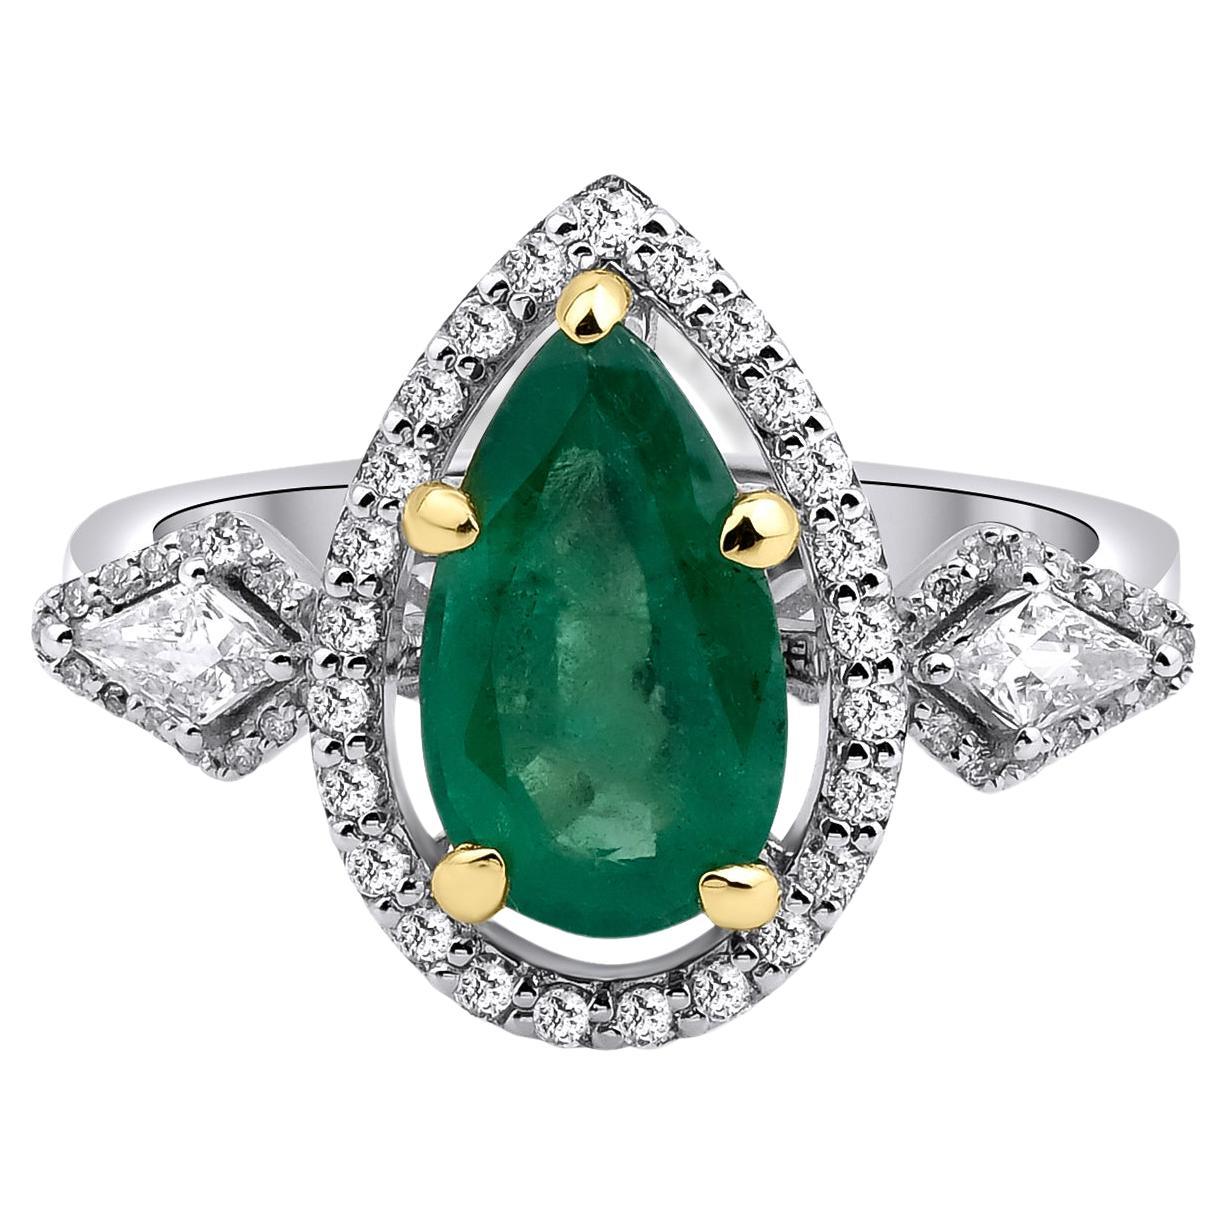 CERTIFIED 1.80CT Pear Cut Emerald And 0.48CT Diamond Tria Ring Solid 18kt Gold